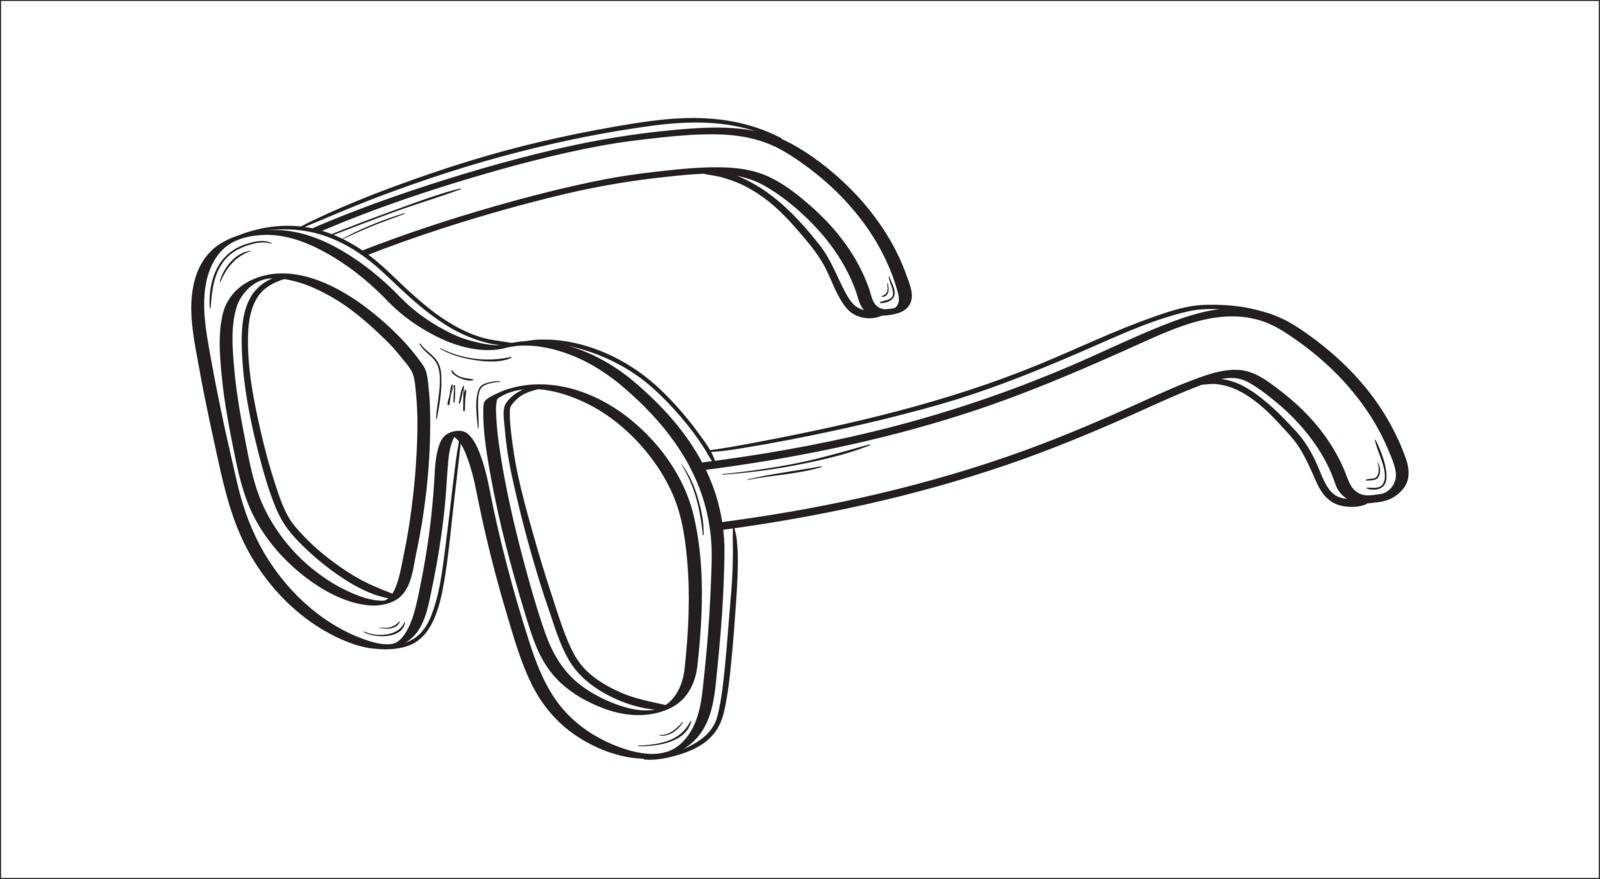 Glasses as a sign of bad sight. Sketch.